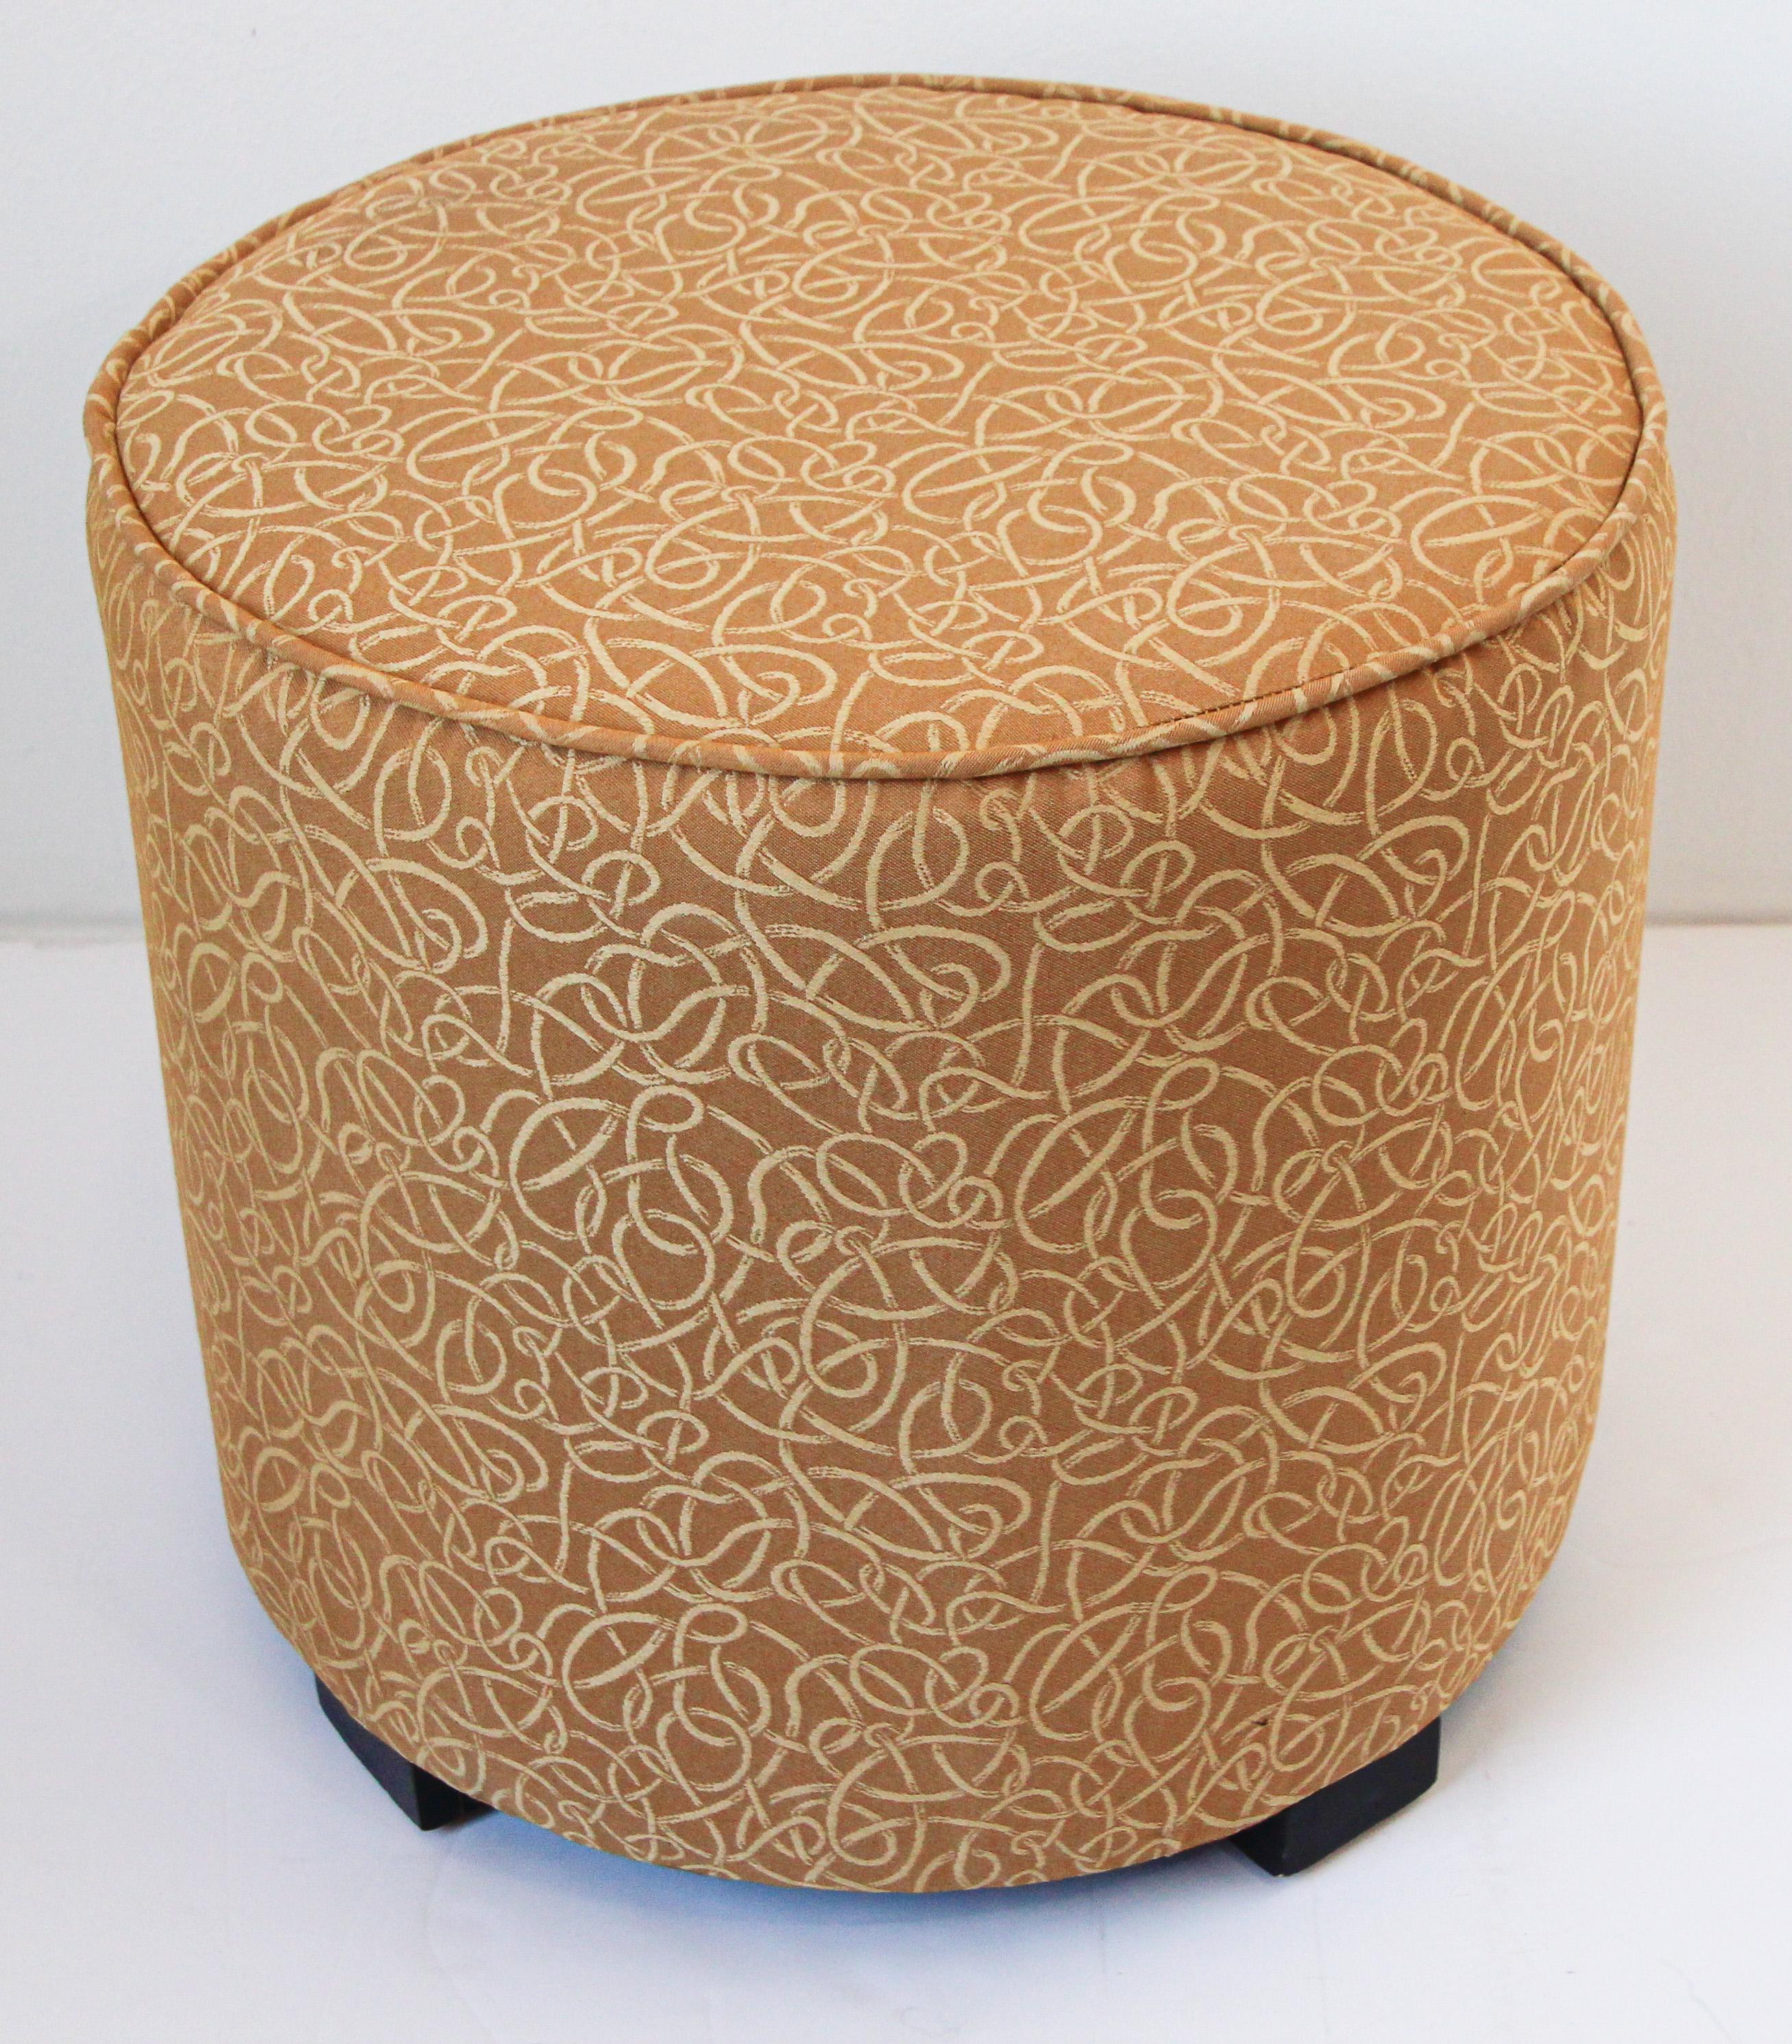 Art Deco Style Moroccan pouf in gold fabric upholstery. Art Deco Style round Moroccan style upholstered stools in gold fabric upholstery. 
Moroccan Art Deco Style little pouf hassock, upholstered footstool or modern circular ottoman. 
This versatile